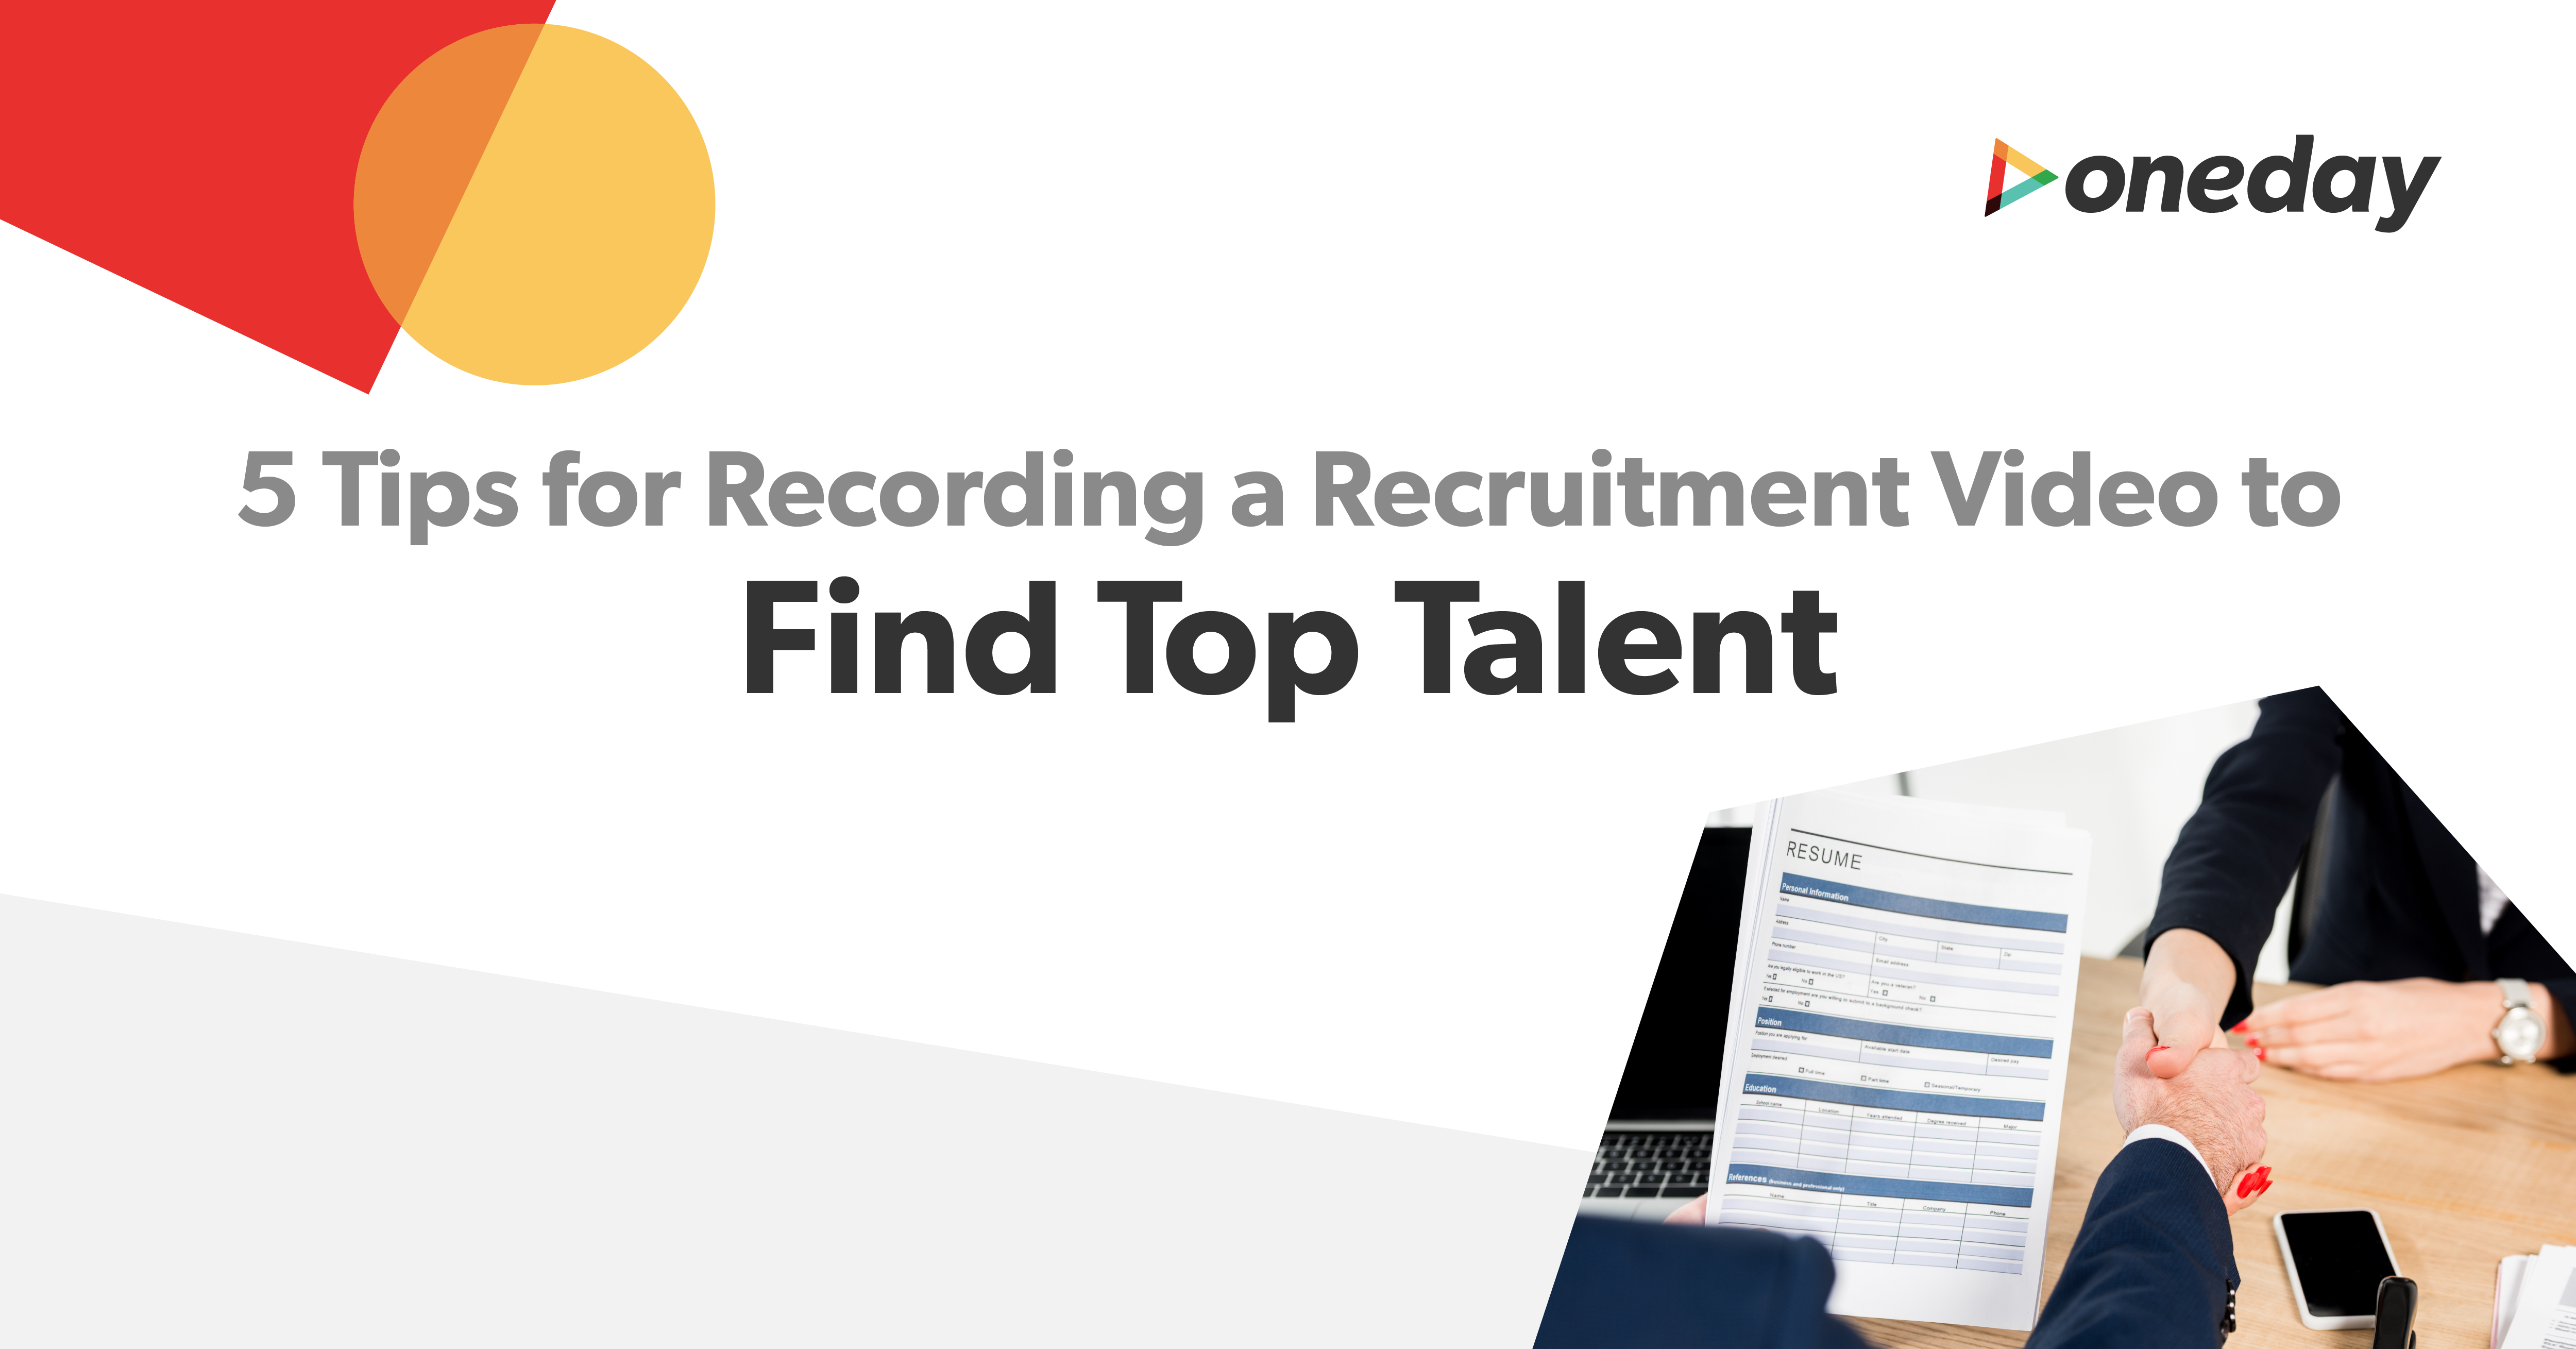 Best practices and insights from OneDay’s team of experts on ways you can use video to propel your recruiting efforts and fight the Great Resignation tides.